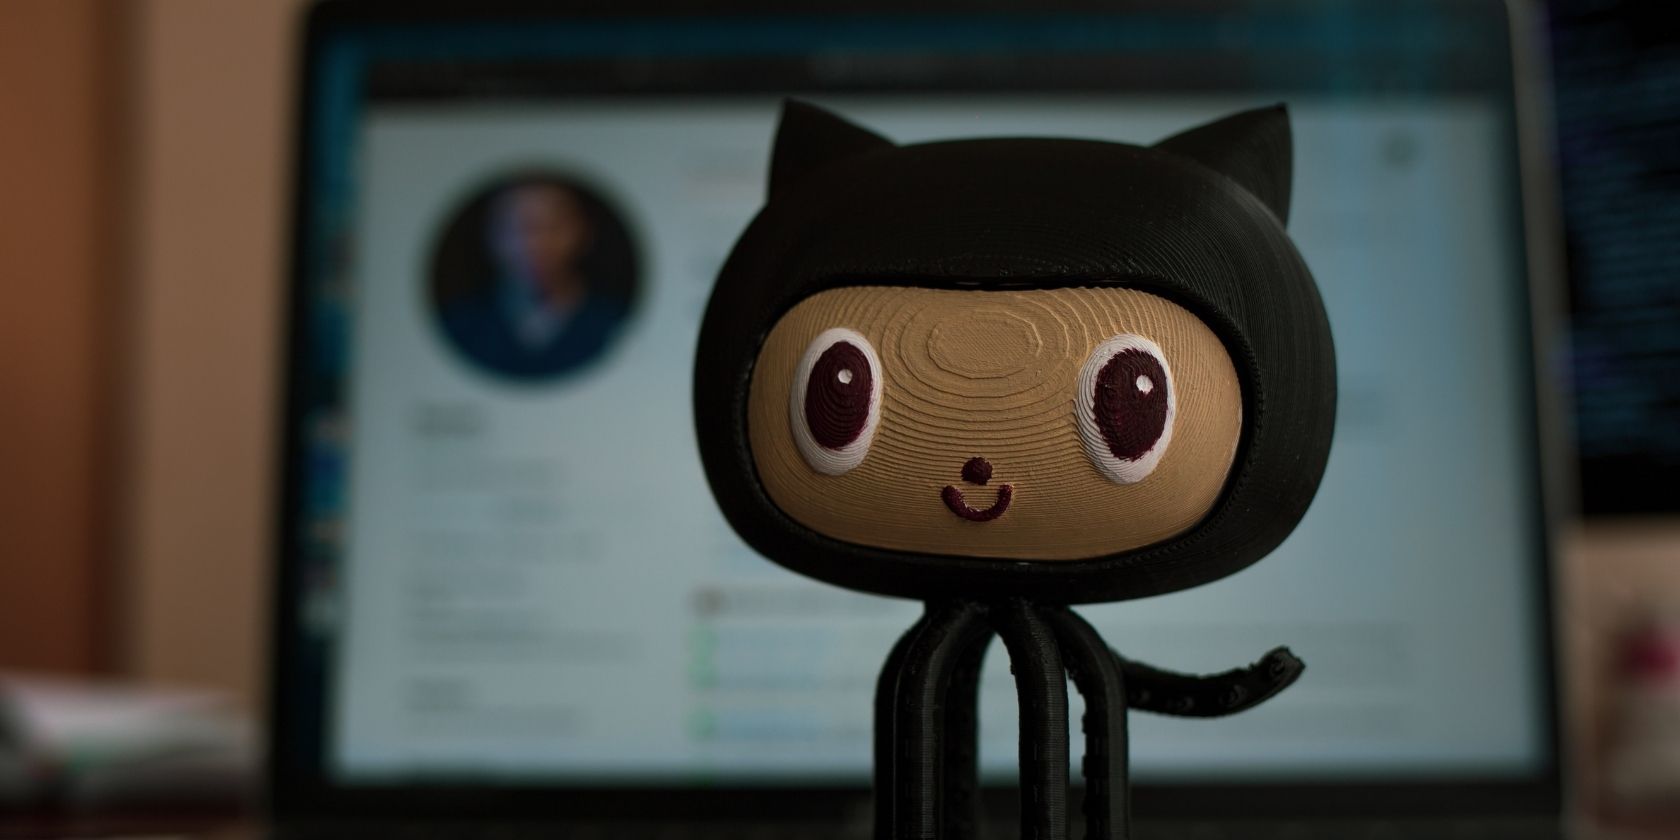 GitHub octocat figurine in front of laptop